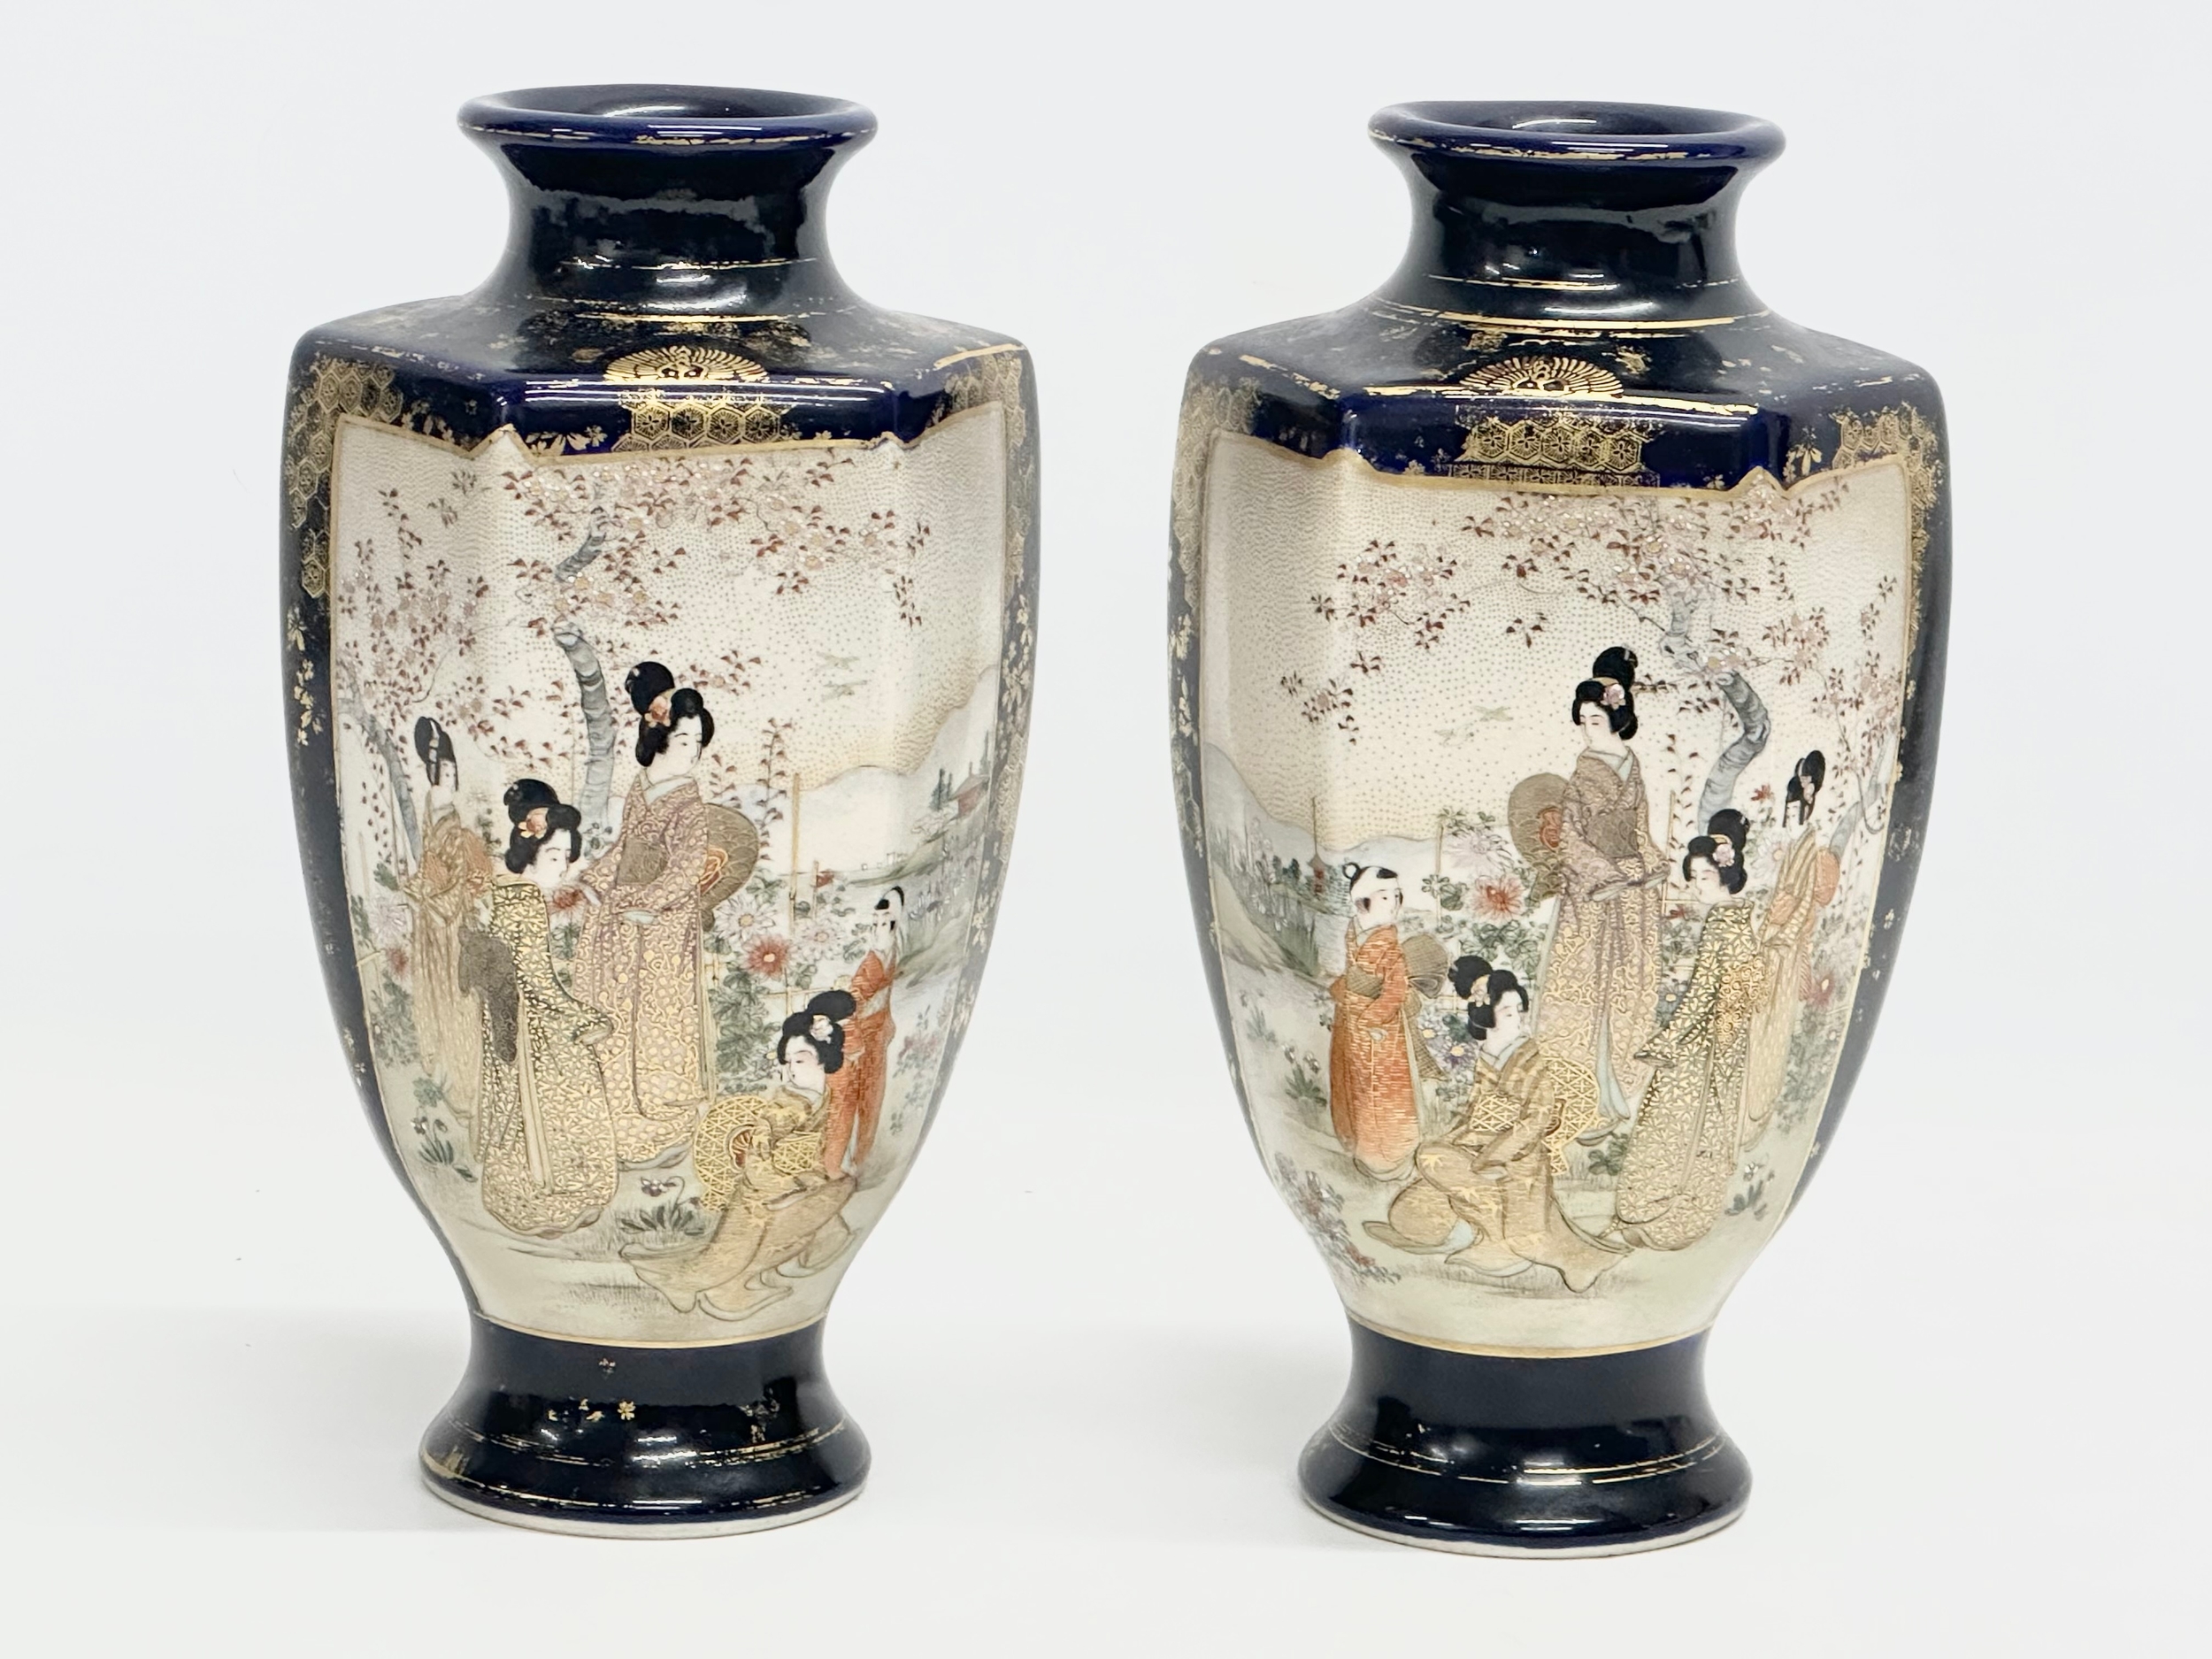 2 pairs of Early 20th Century Japanese vases. Signed by Kusube for Satsuma. Circa 1900. 13x25cm - Image 4 of 8